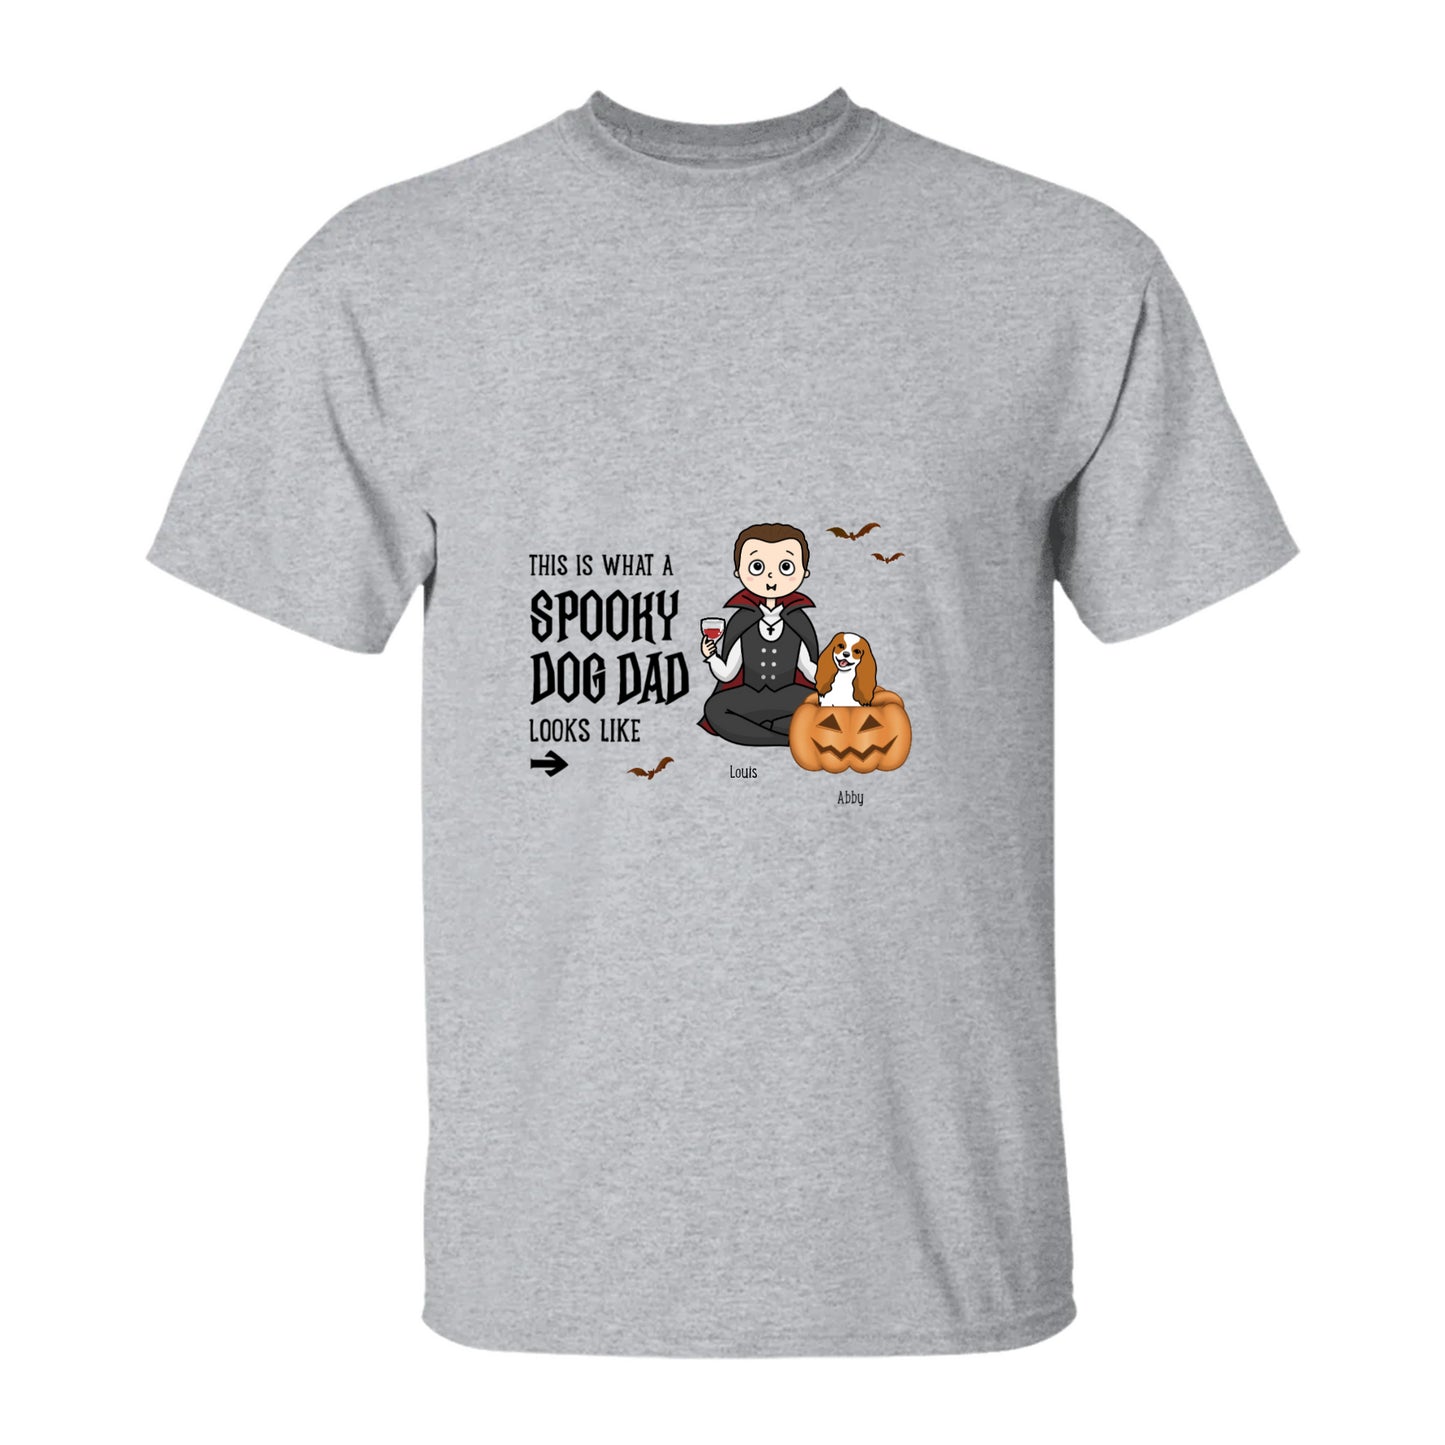 This Is What A Spooky Dog Dad Looks Like T-Shirt